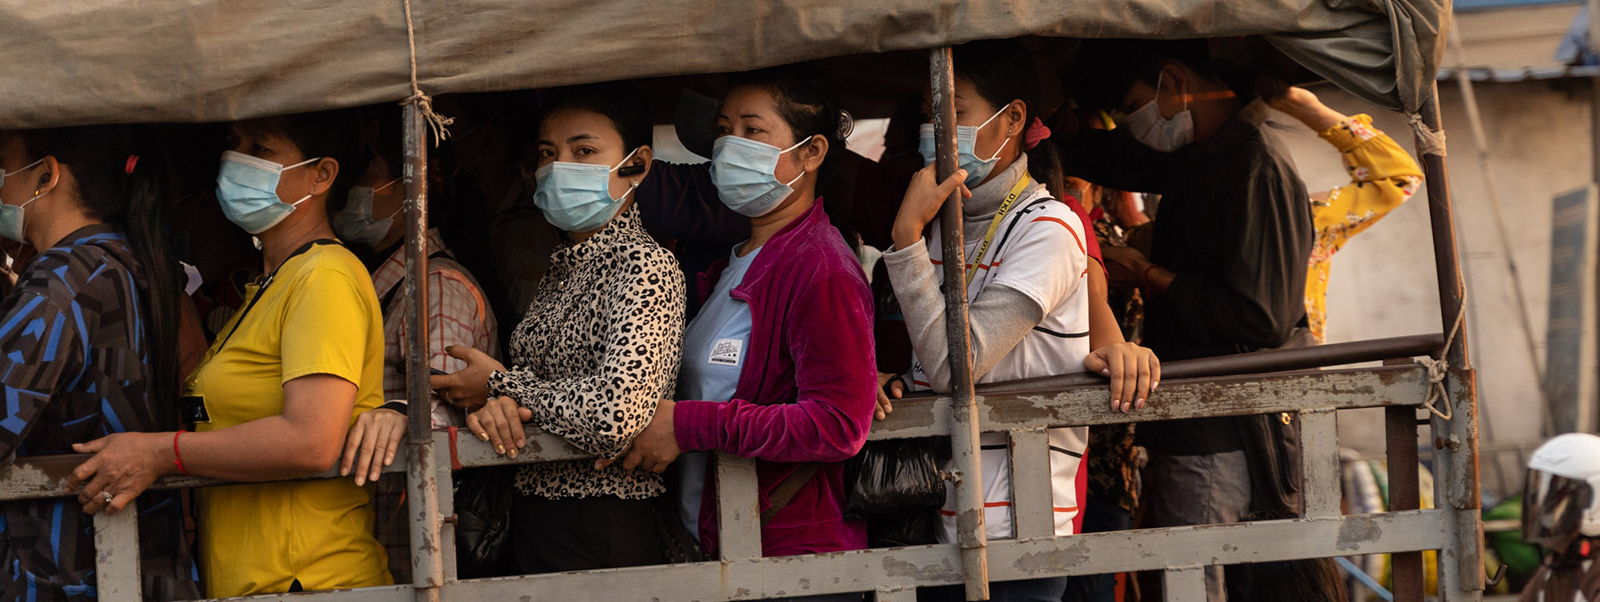 Cambodian garment workers commuting to work in a factory in Phnom Penh, March 2021, by Thomas Cristofoletti/Ruom. Copyright Thomas Cristofoletti/Ruom.